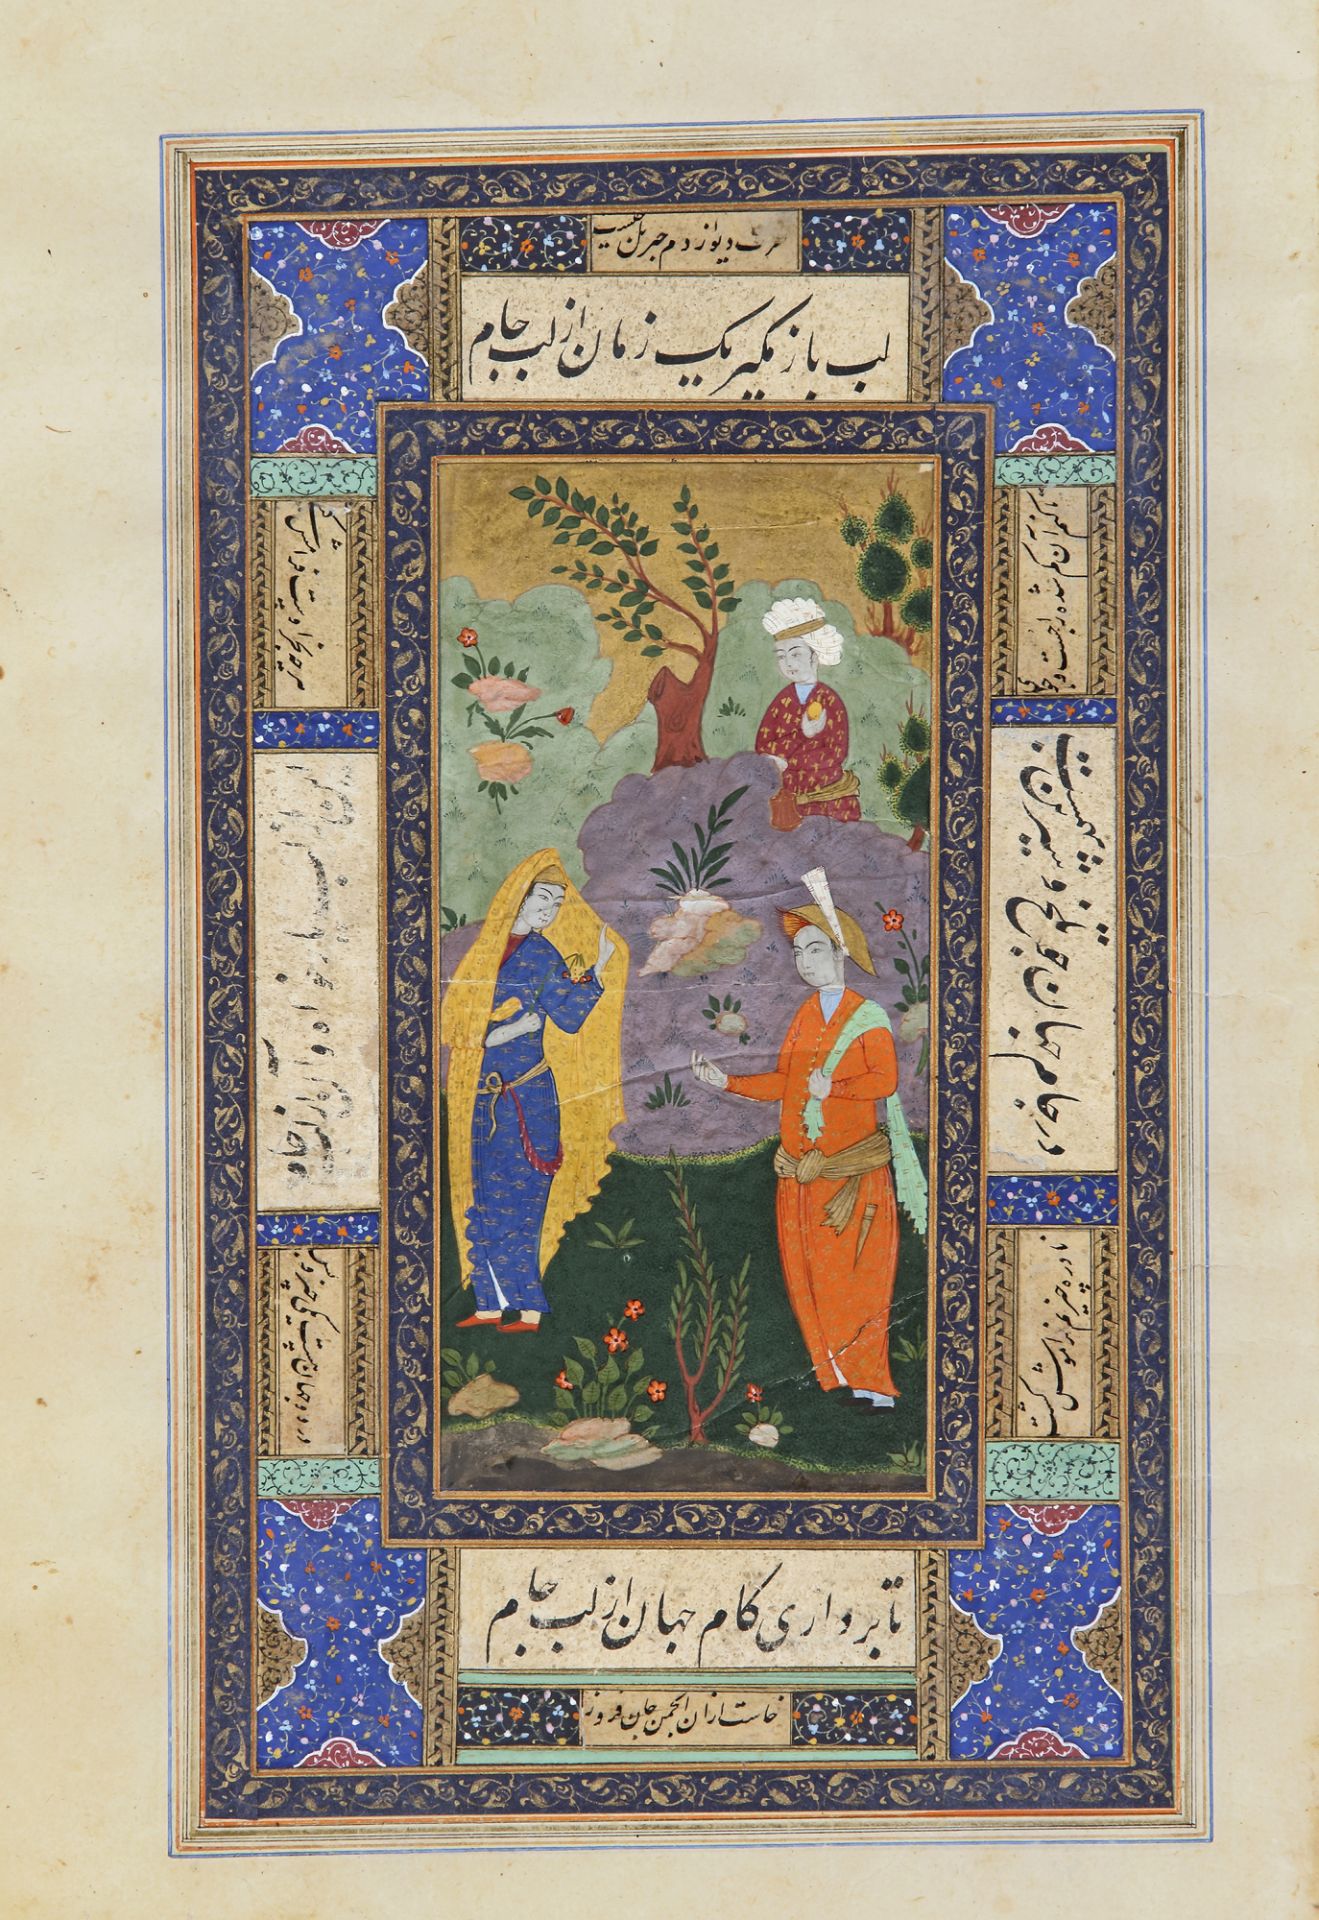 A PERSIAN DOUBLE-SIDED MINIATURE, ISFAHAN SCHOOL, 18TH CENTURY - Image 3 of 4